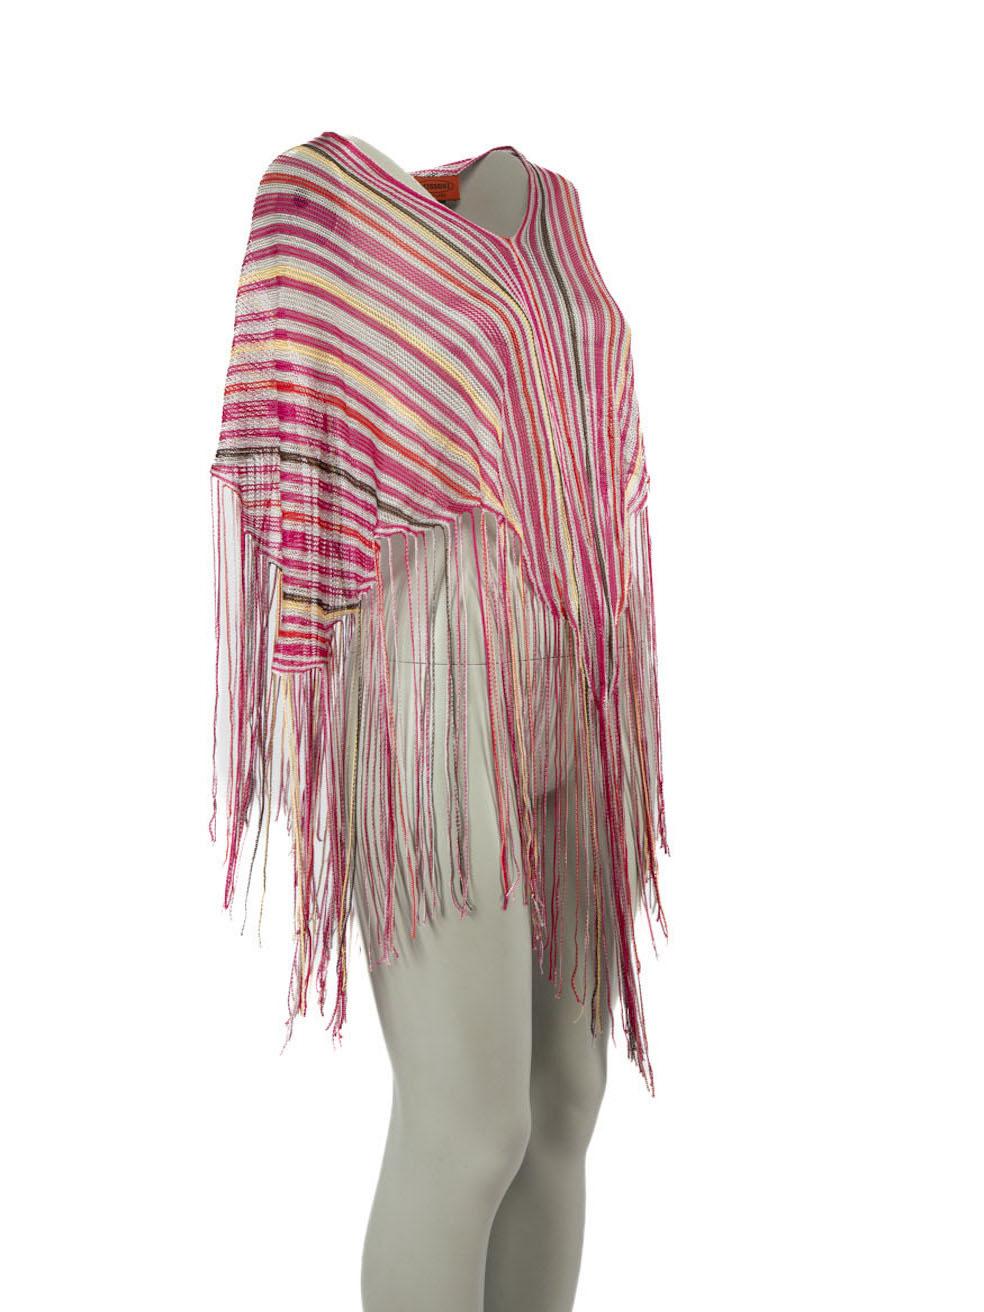 CONDITION is Very good. Hardly any visible wear to poncho is evident on this used Missoni Foulard designer resale item.

Details
Multicolour
Viscose
Knit poncho
Striped
V-neck
Fringe hem
Made in Italy 

Composition
100% Viscose

Care instructions: